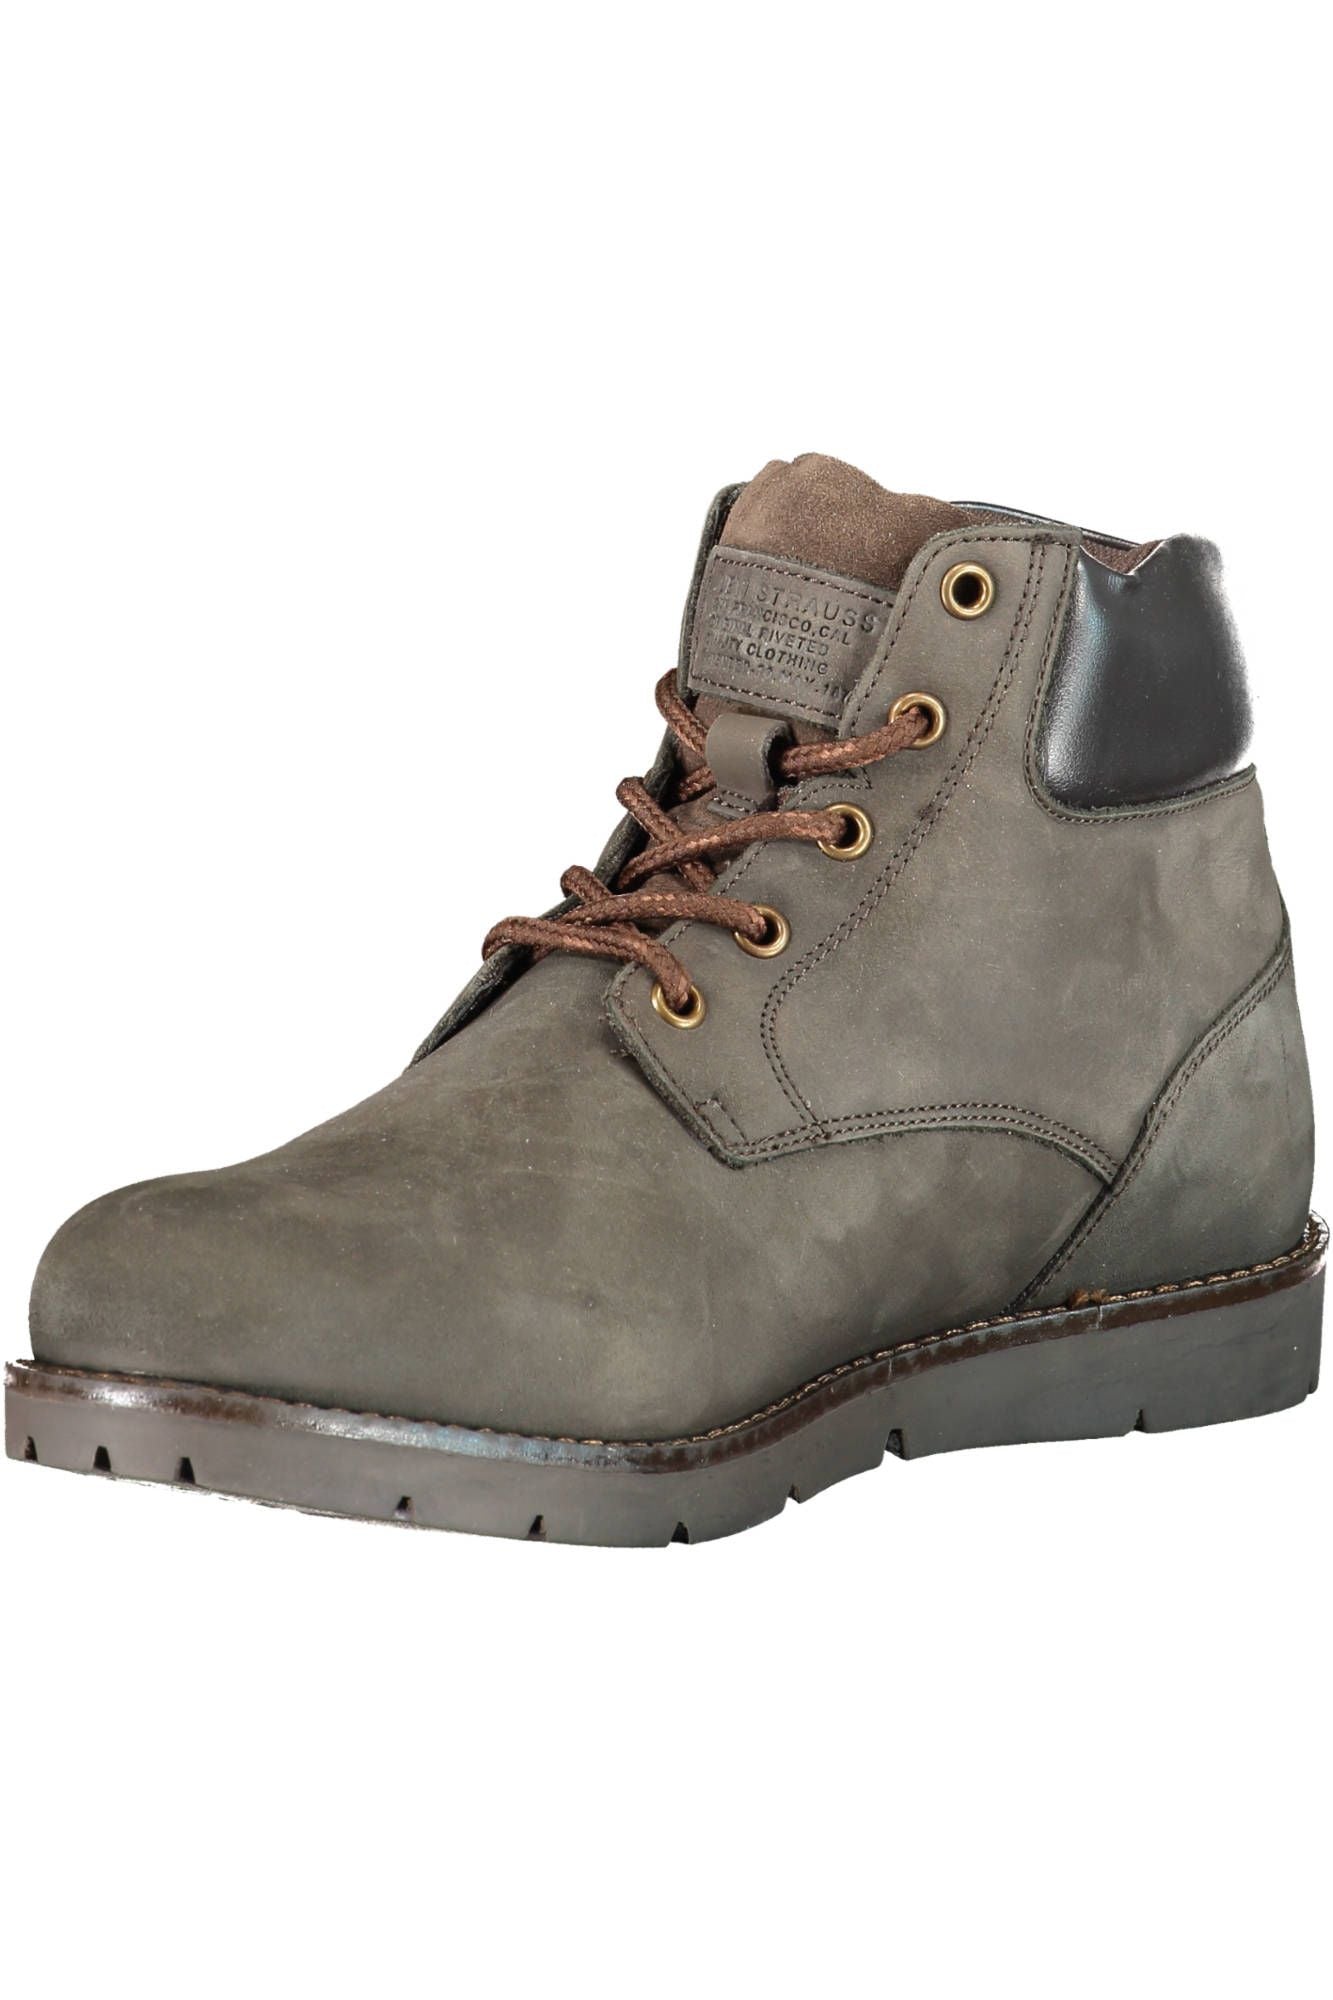 Levi's Rustic Brown Ankle Lace-Up Boots